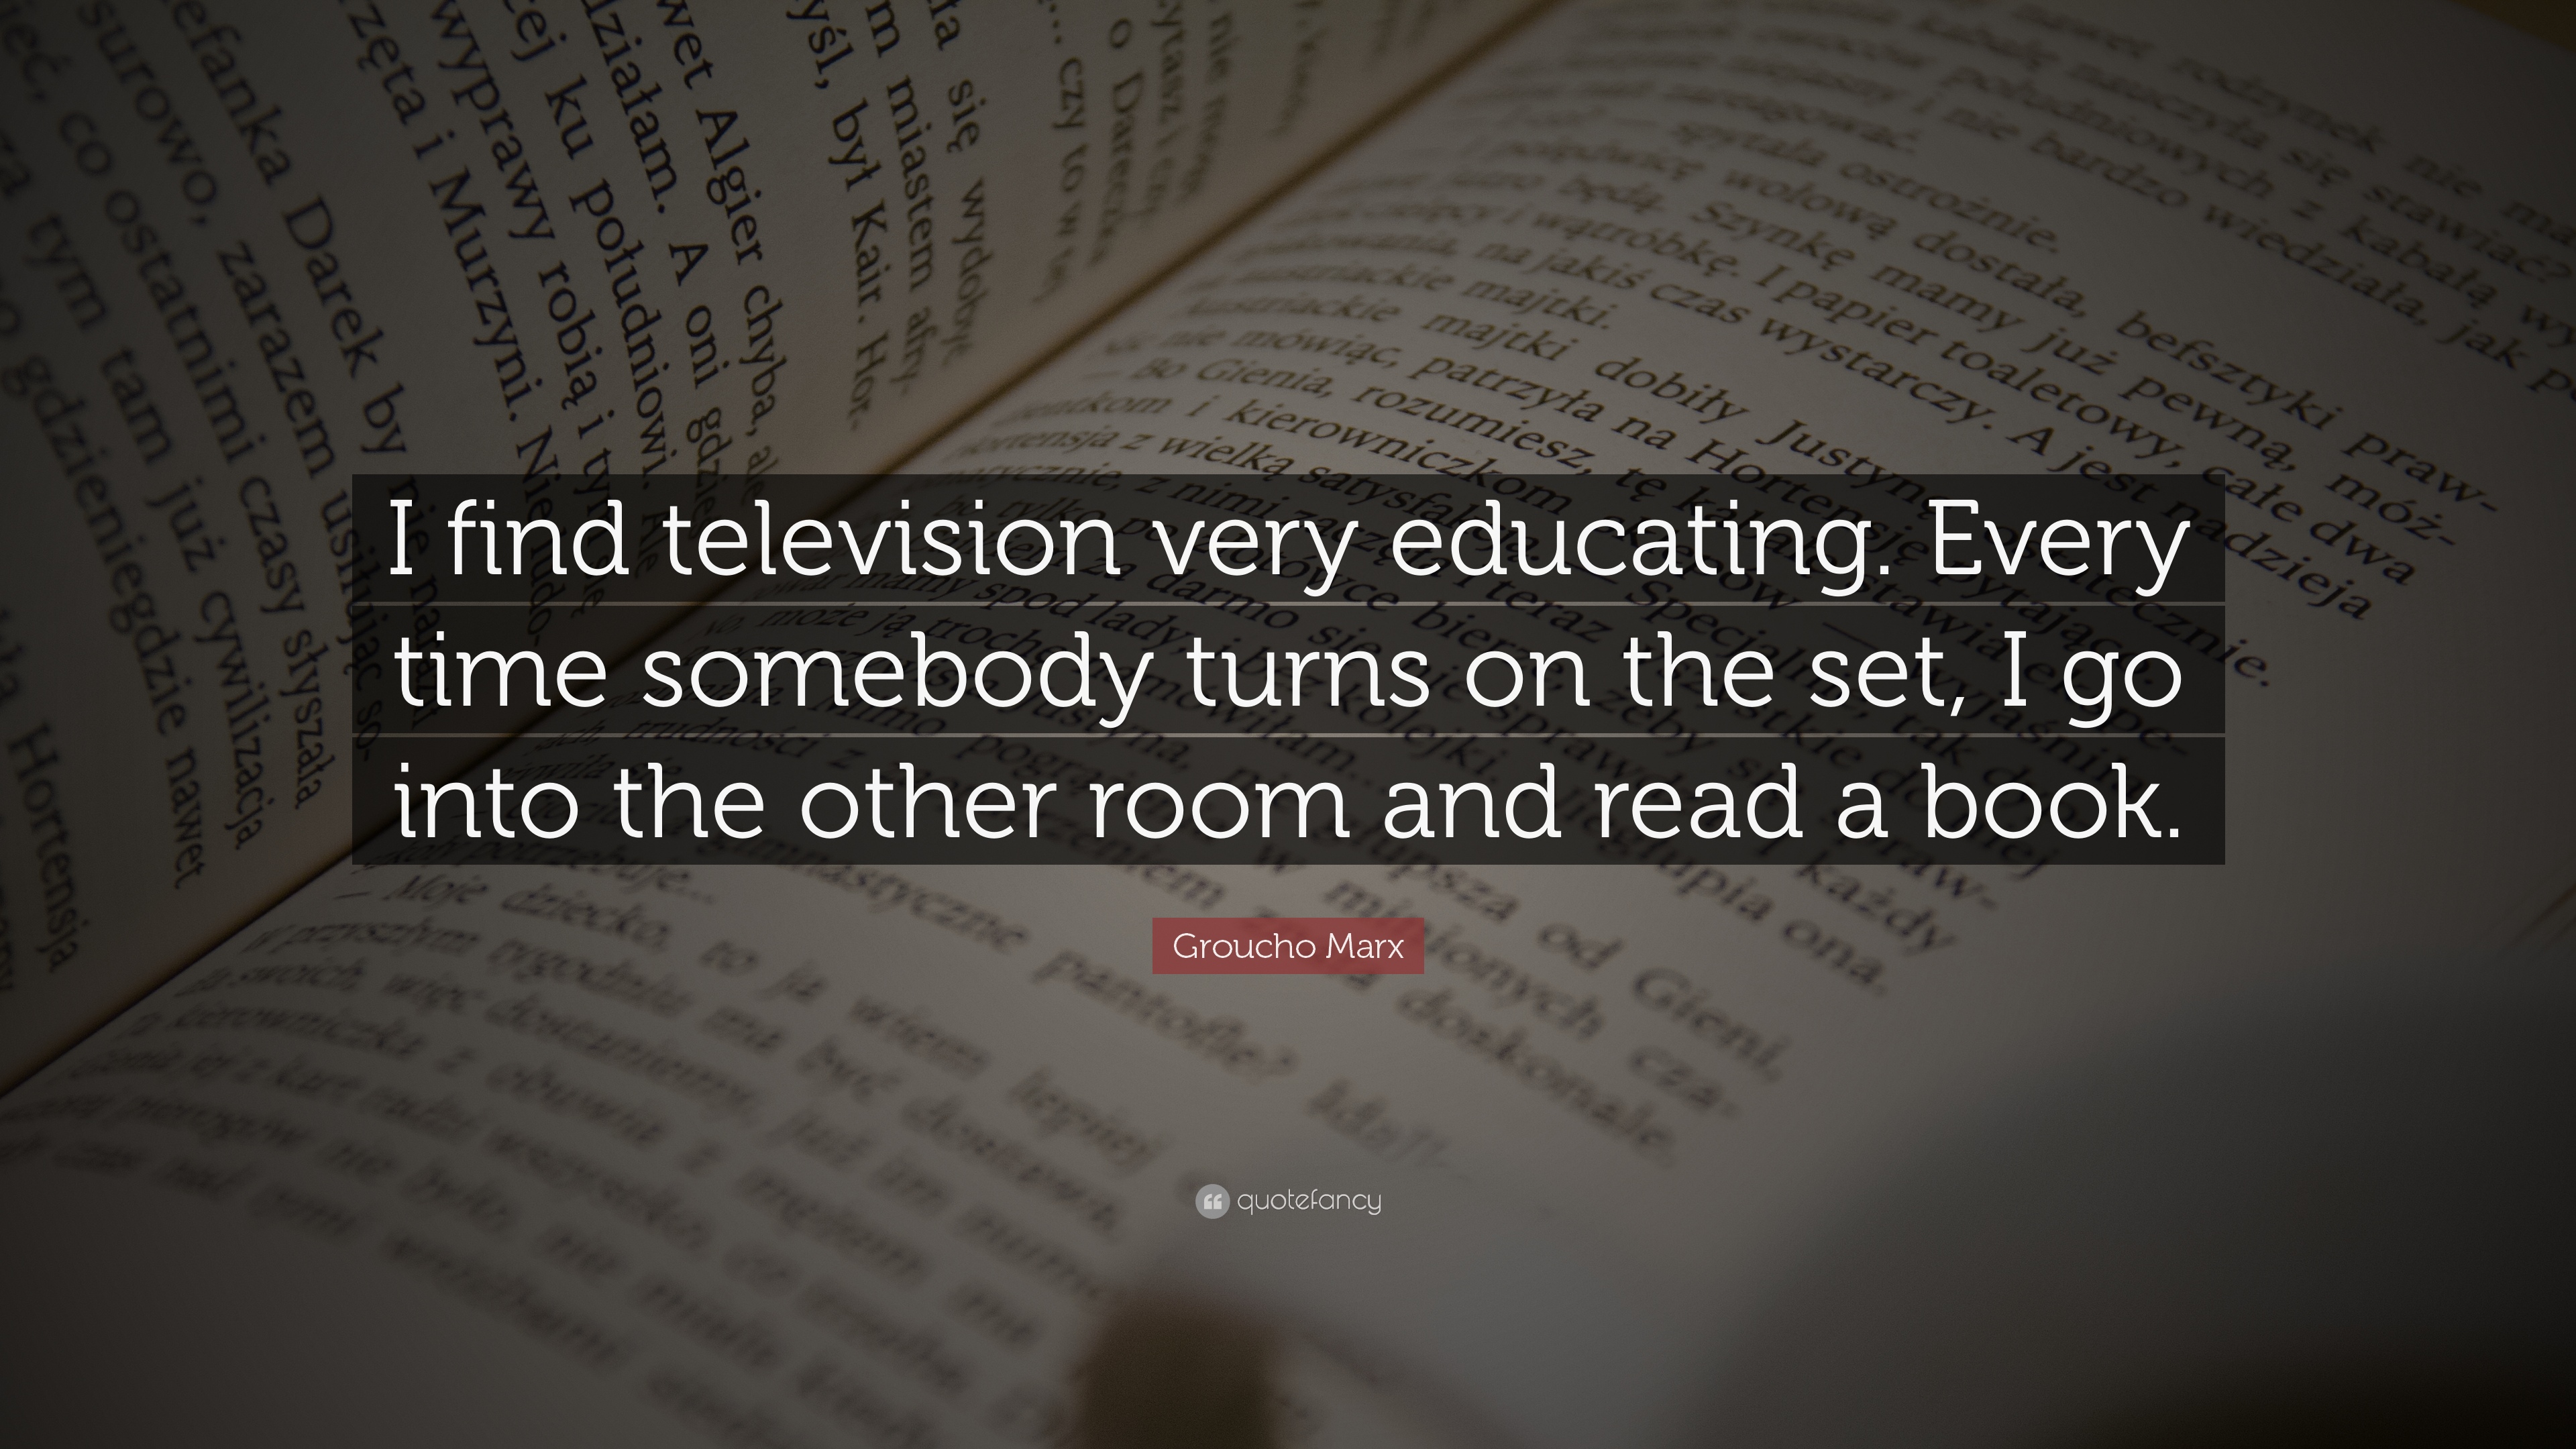 Groucho Marx Quote: “I find television very educating. Every time ...